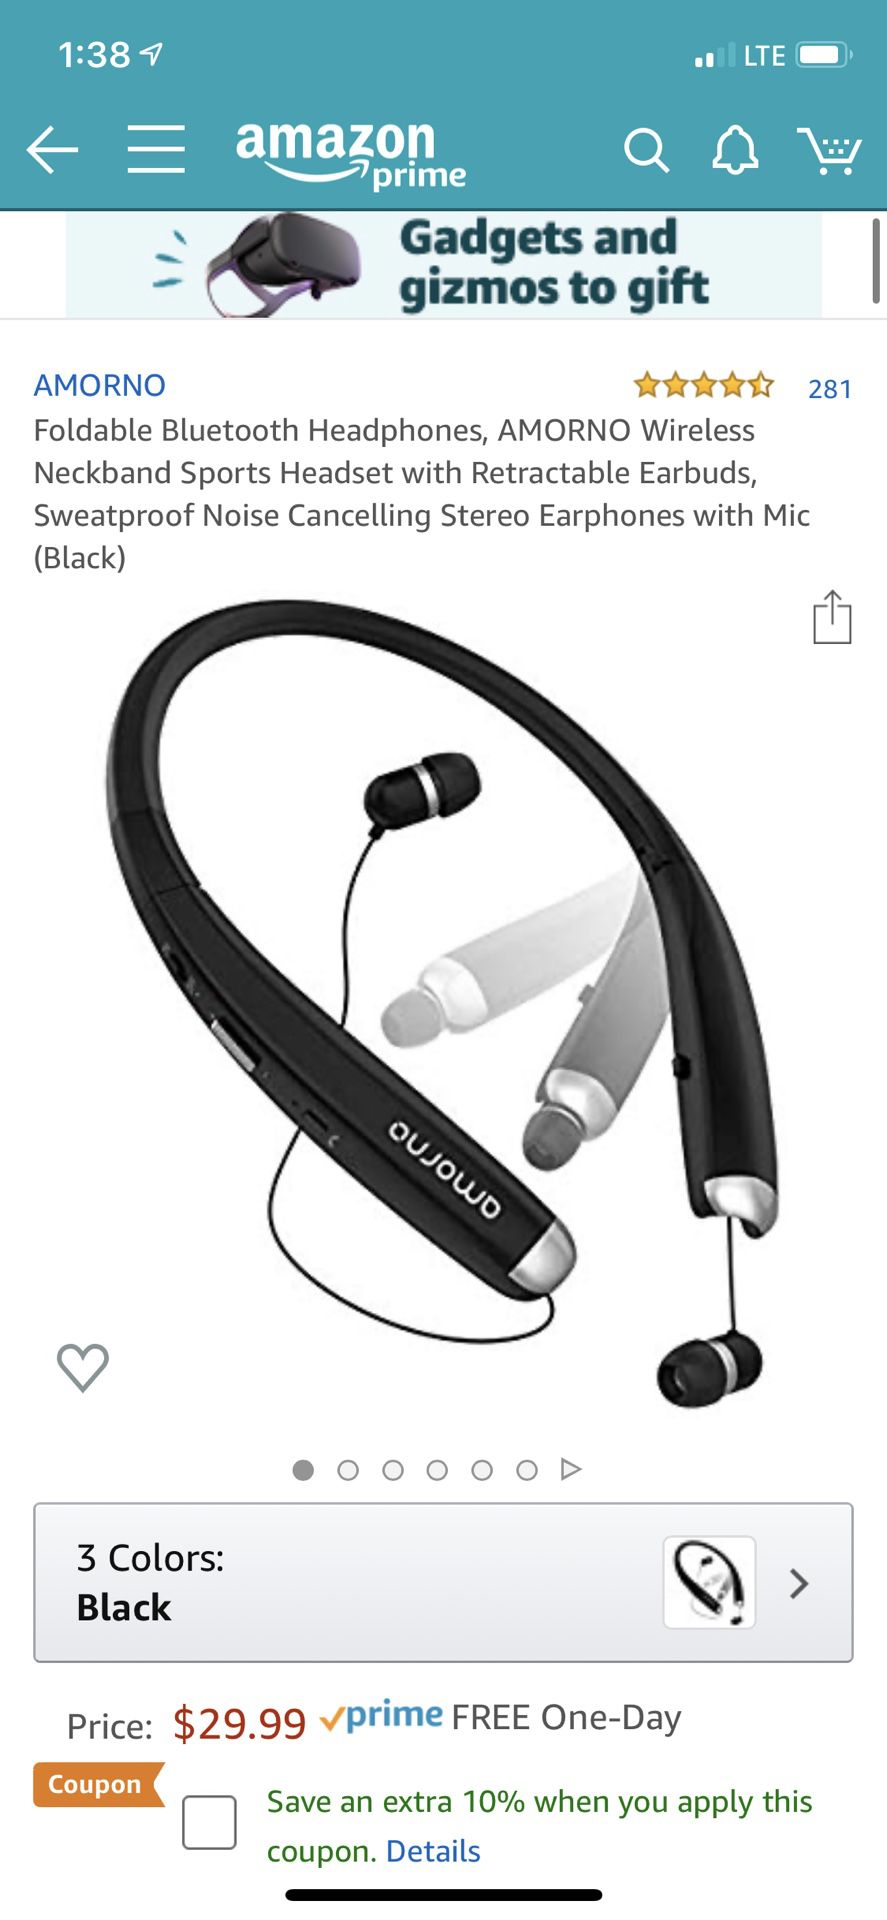 Foldable Bluetooth Headphones, AMORNO Wireless Neckband Sports Headset with Retractable Earbuds, Sweatproof Noise Cancelling Stereo Earphones with Mi